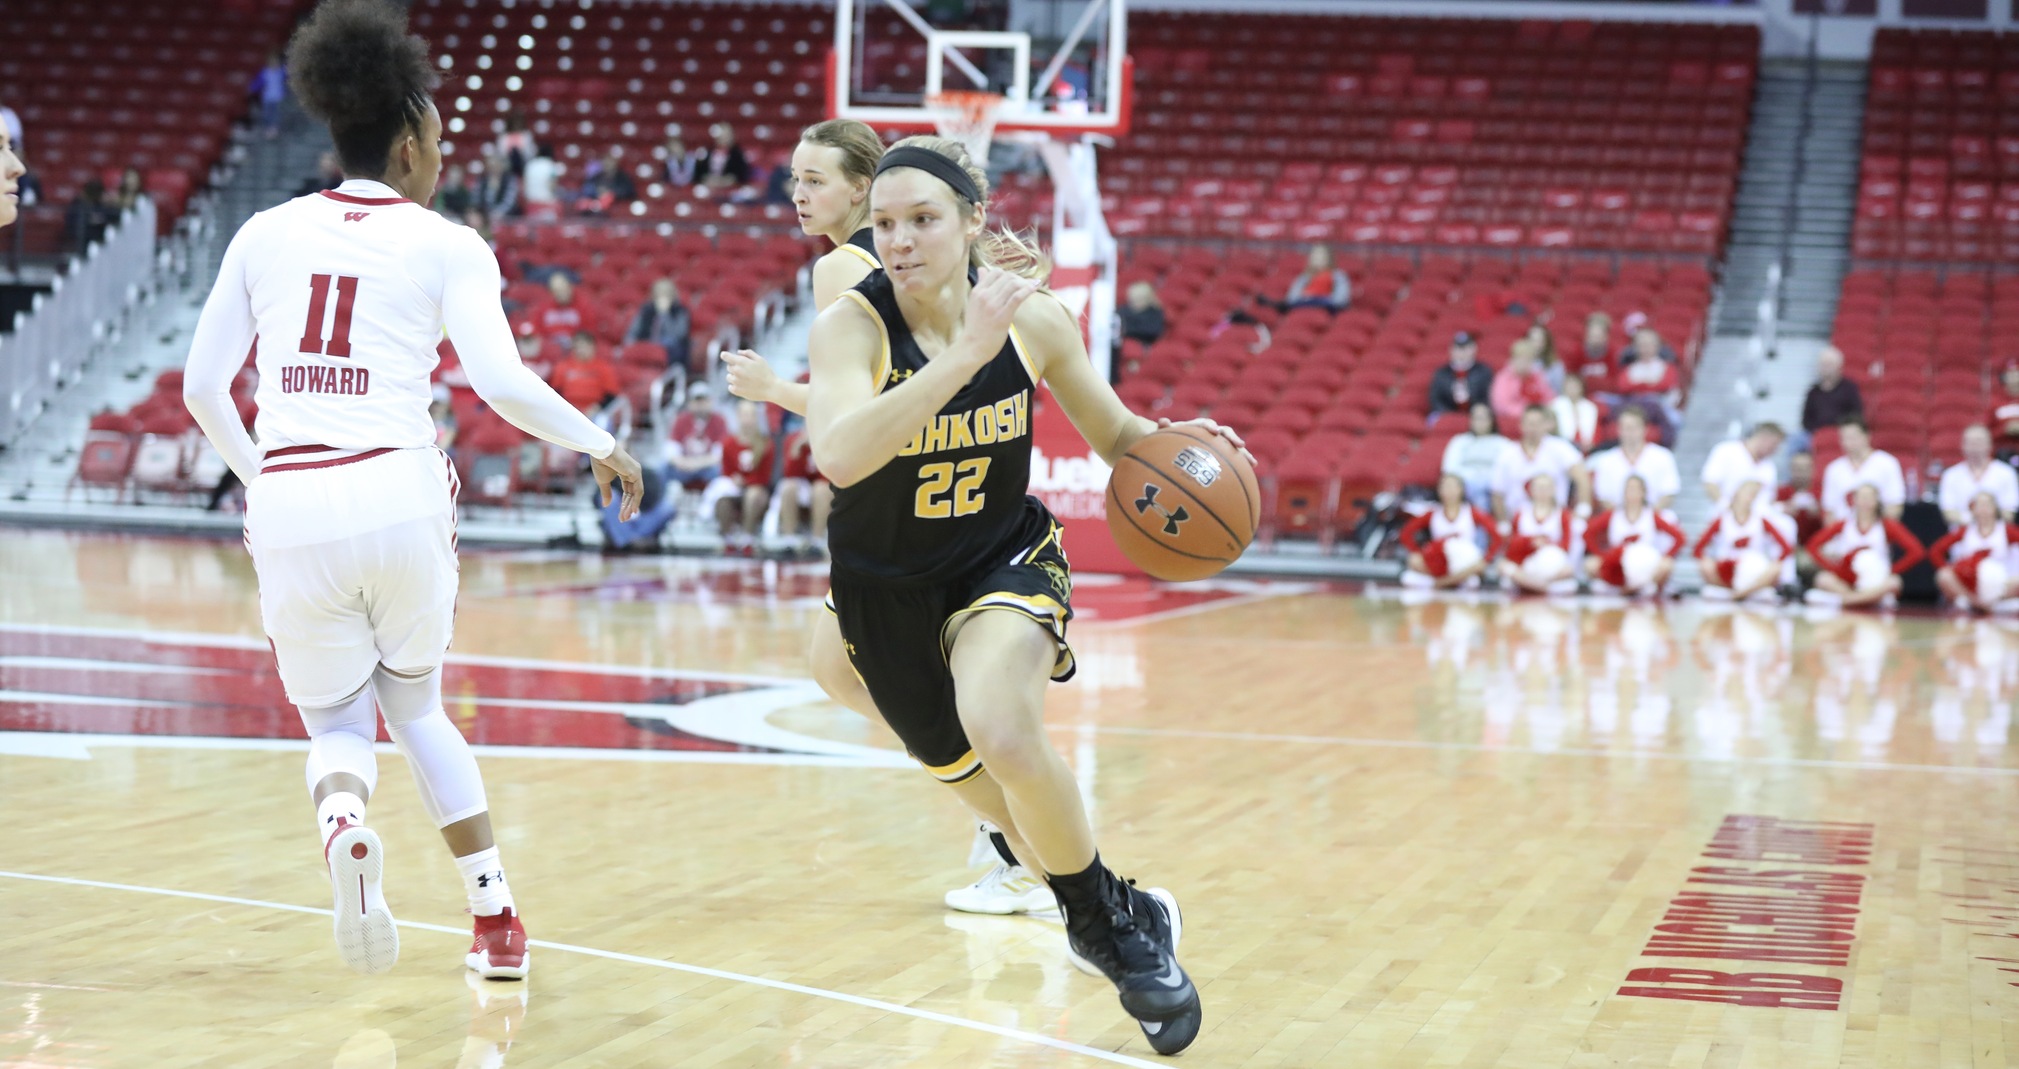 Melanie Schneider scored 16 points while totaling six rebounds and three assists against the Saints.